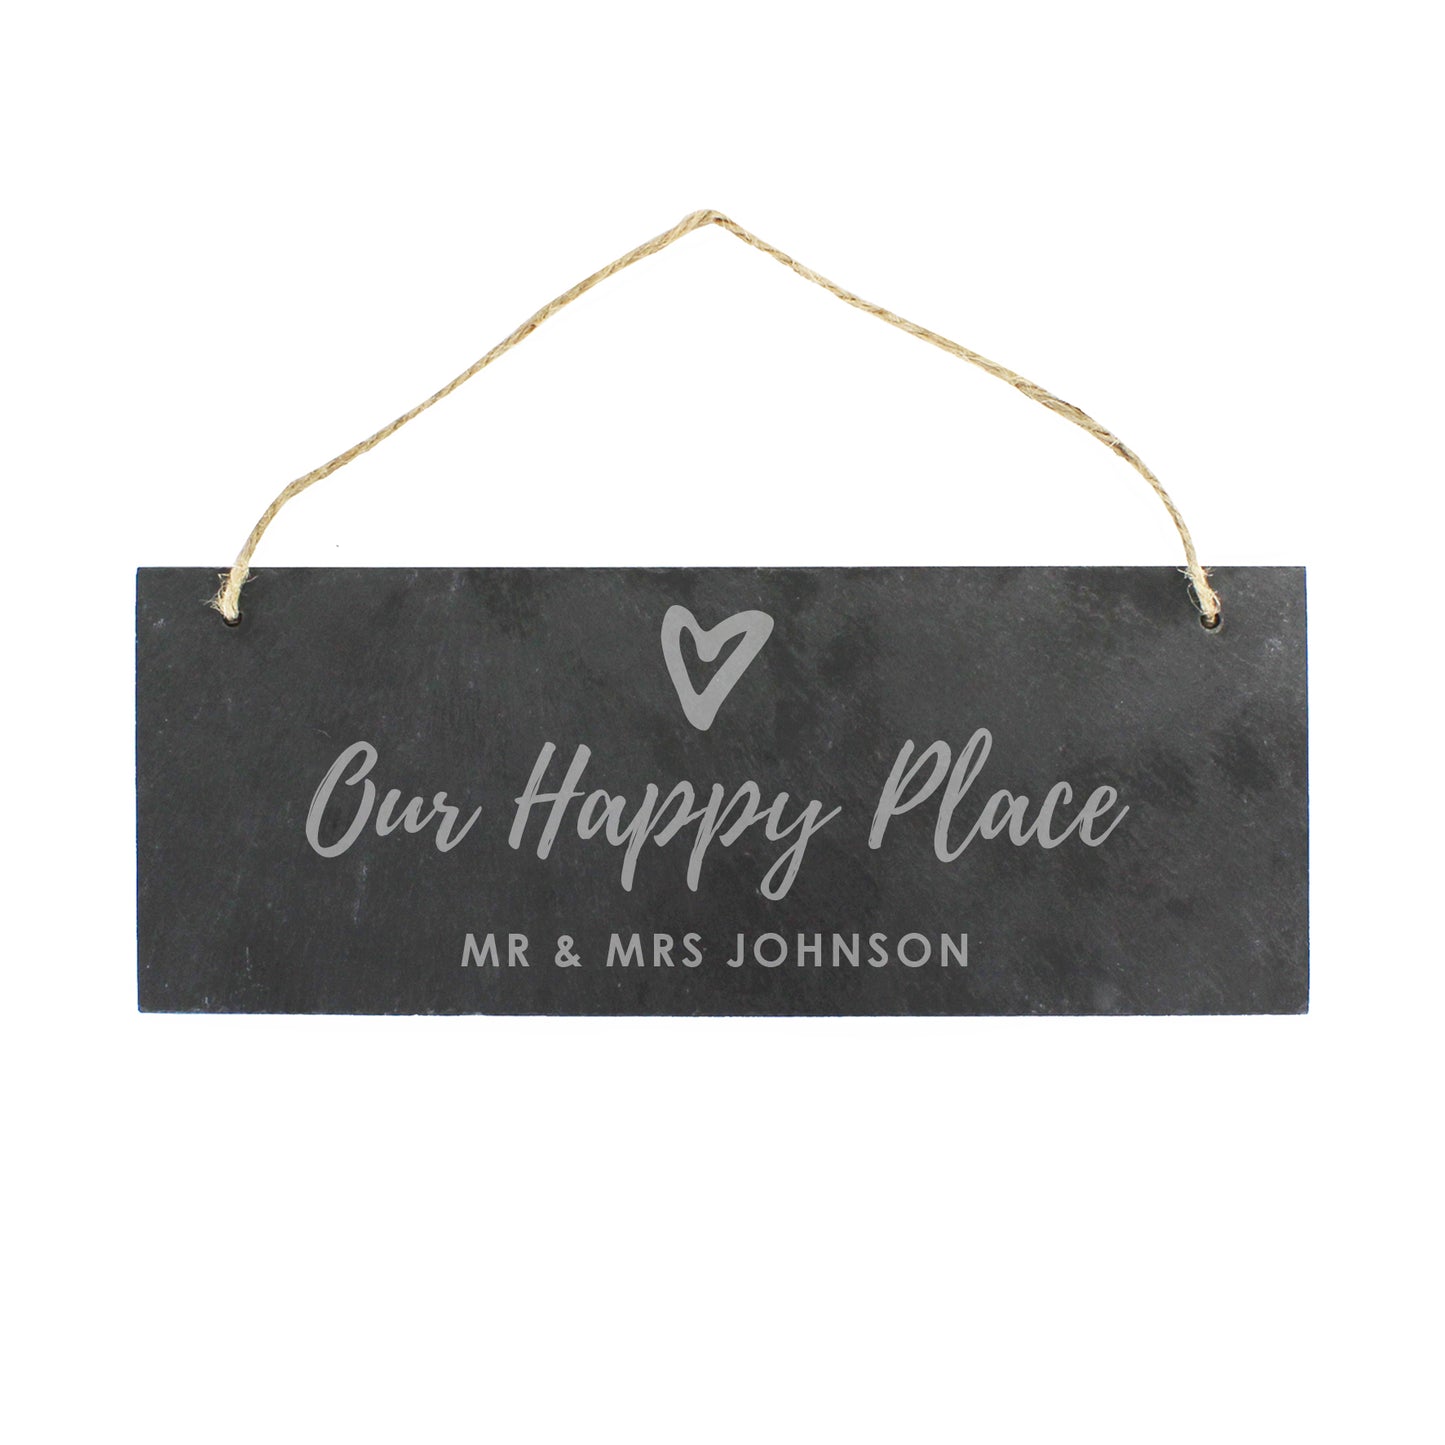 Personalised Our Happy Place Hanging Slate Plaque - Personalise It!